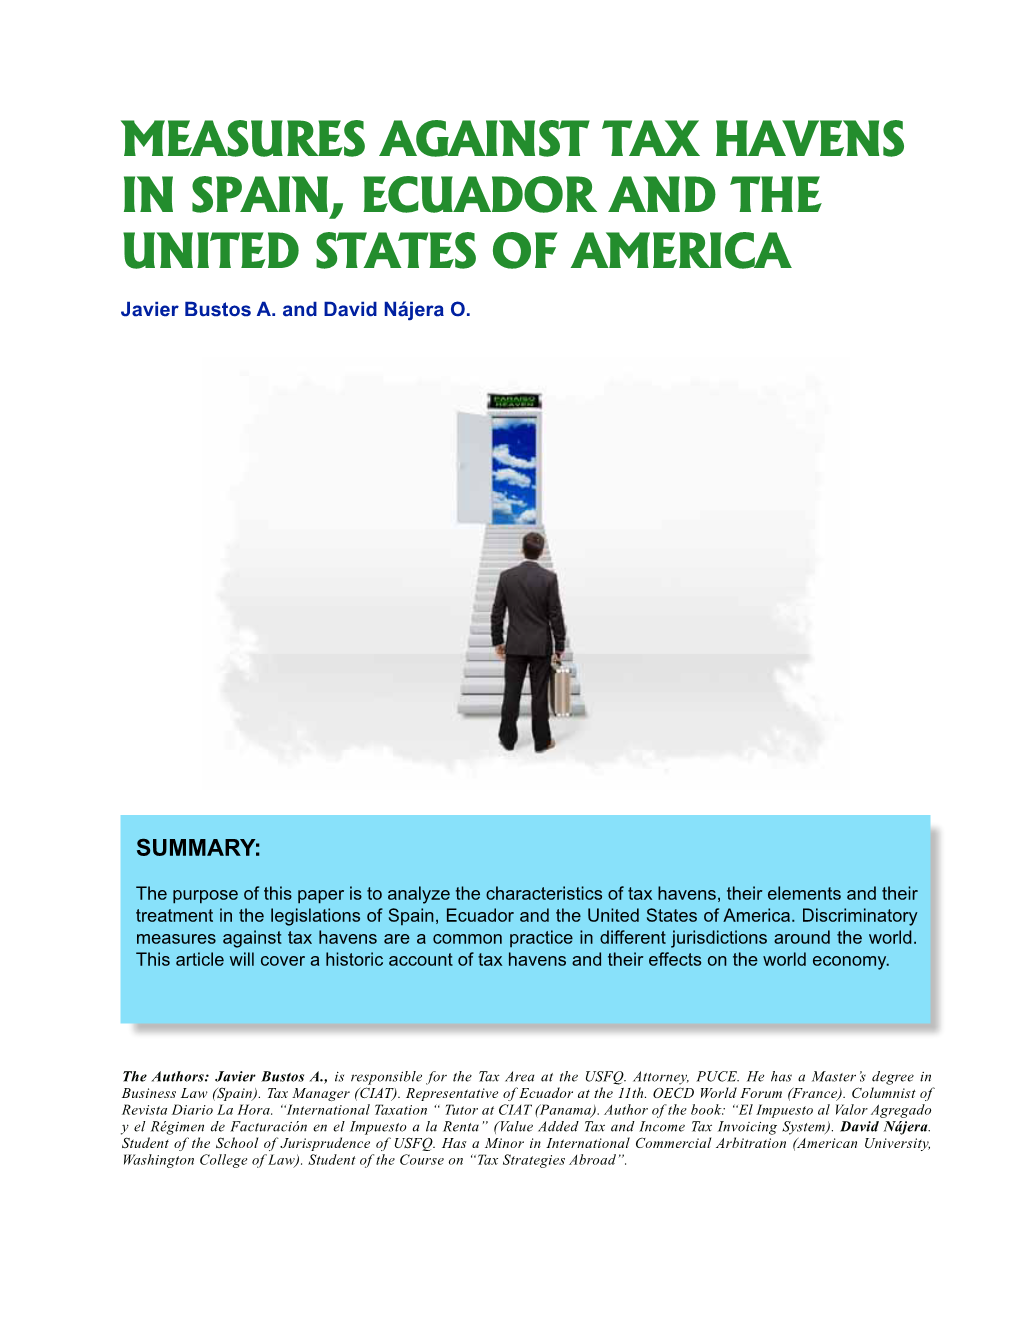 Measures Against Tax Havens in Spain, Ecuador and the United States of America